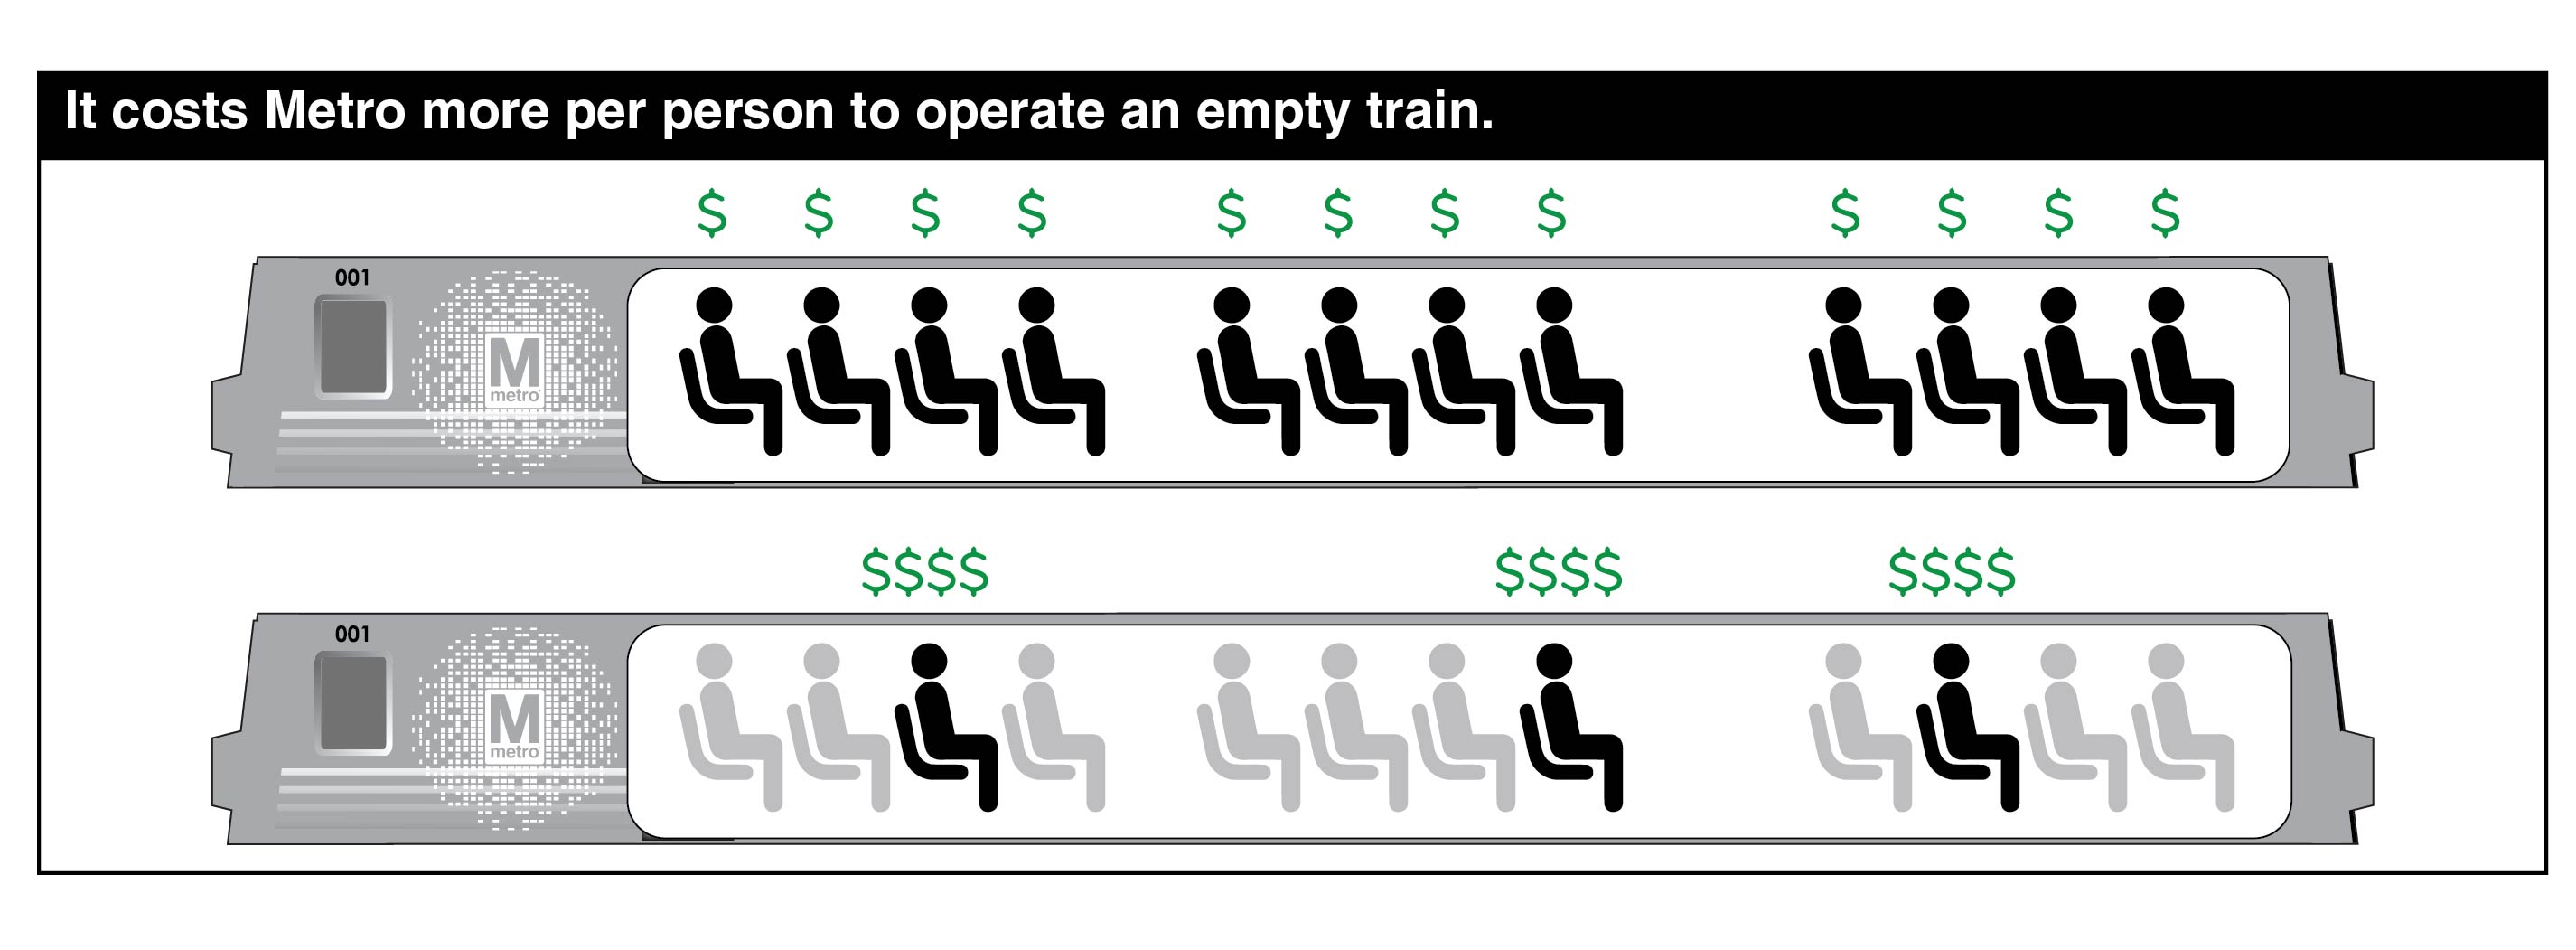 Illustrative comparison of the cost to taxpayers of operating fully-occupied trains versus almost empty trains.